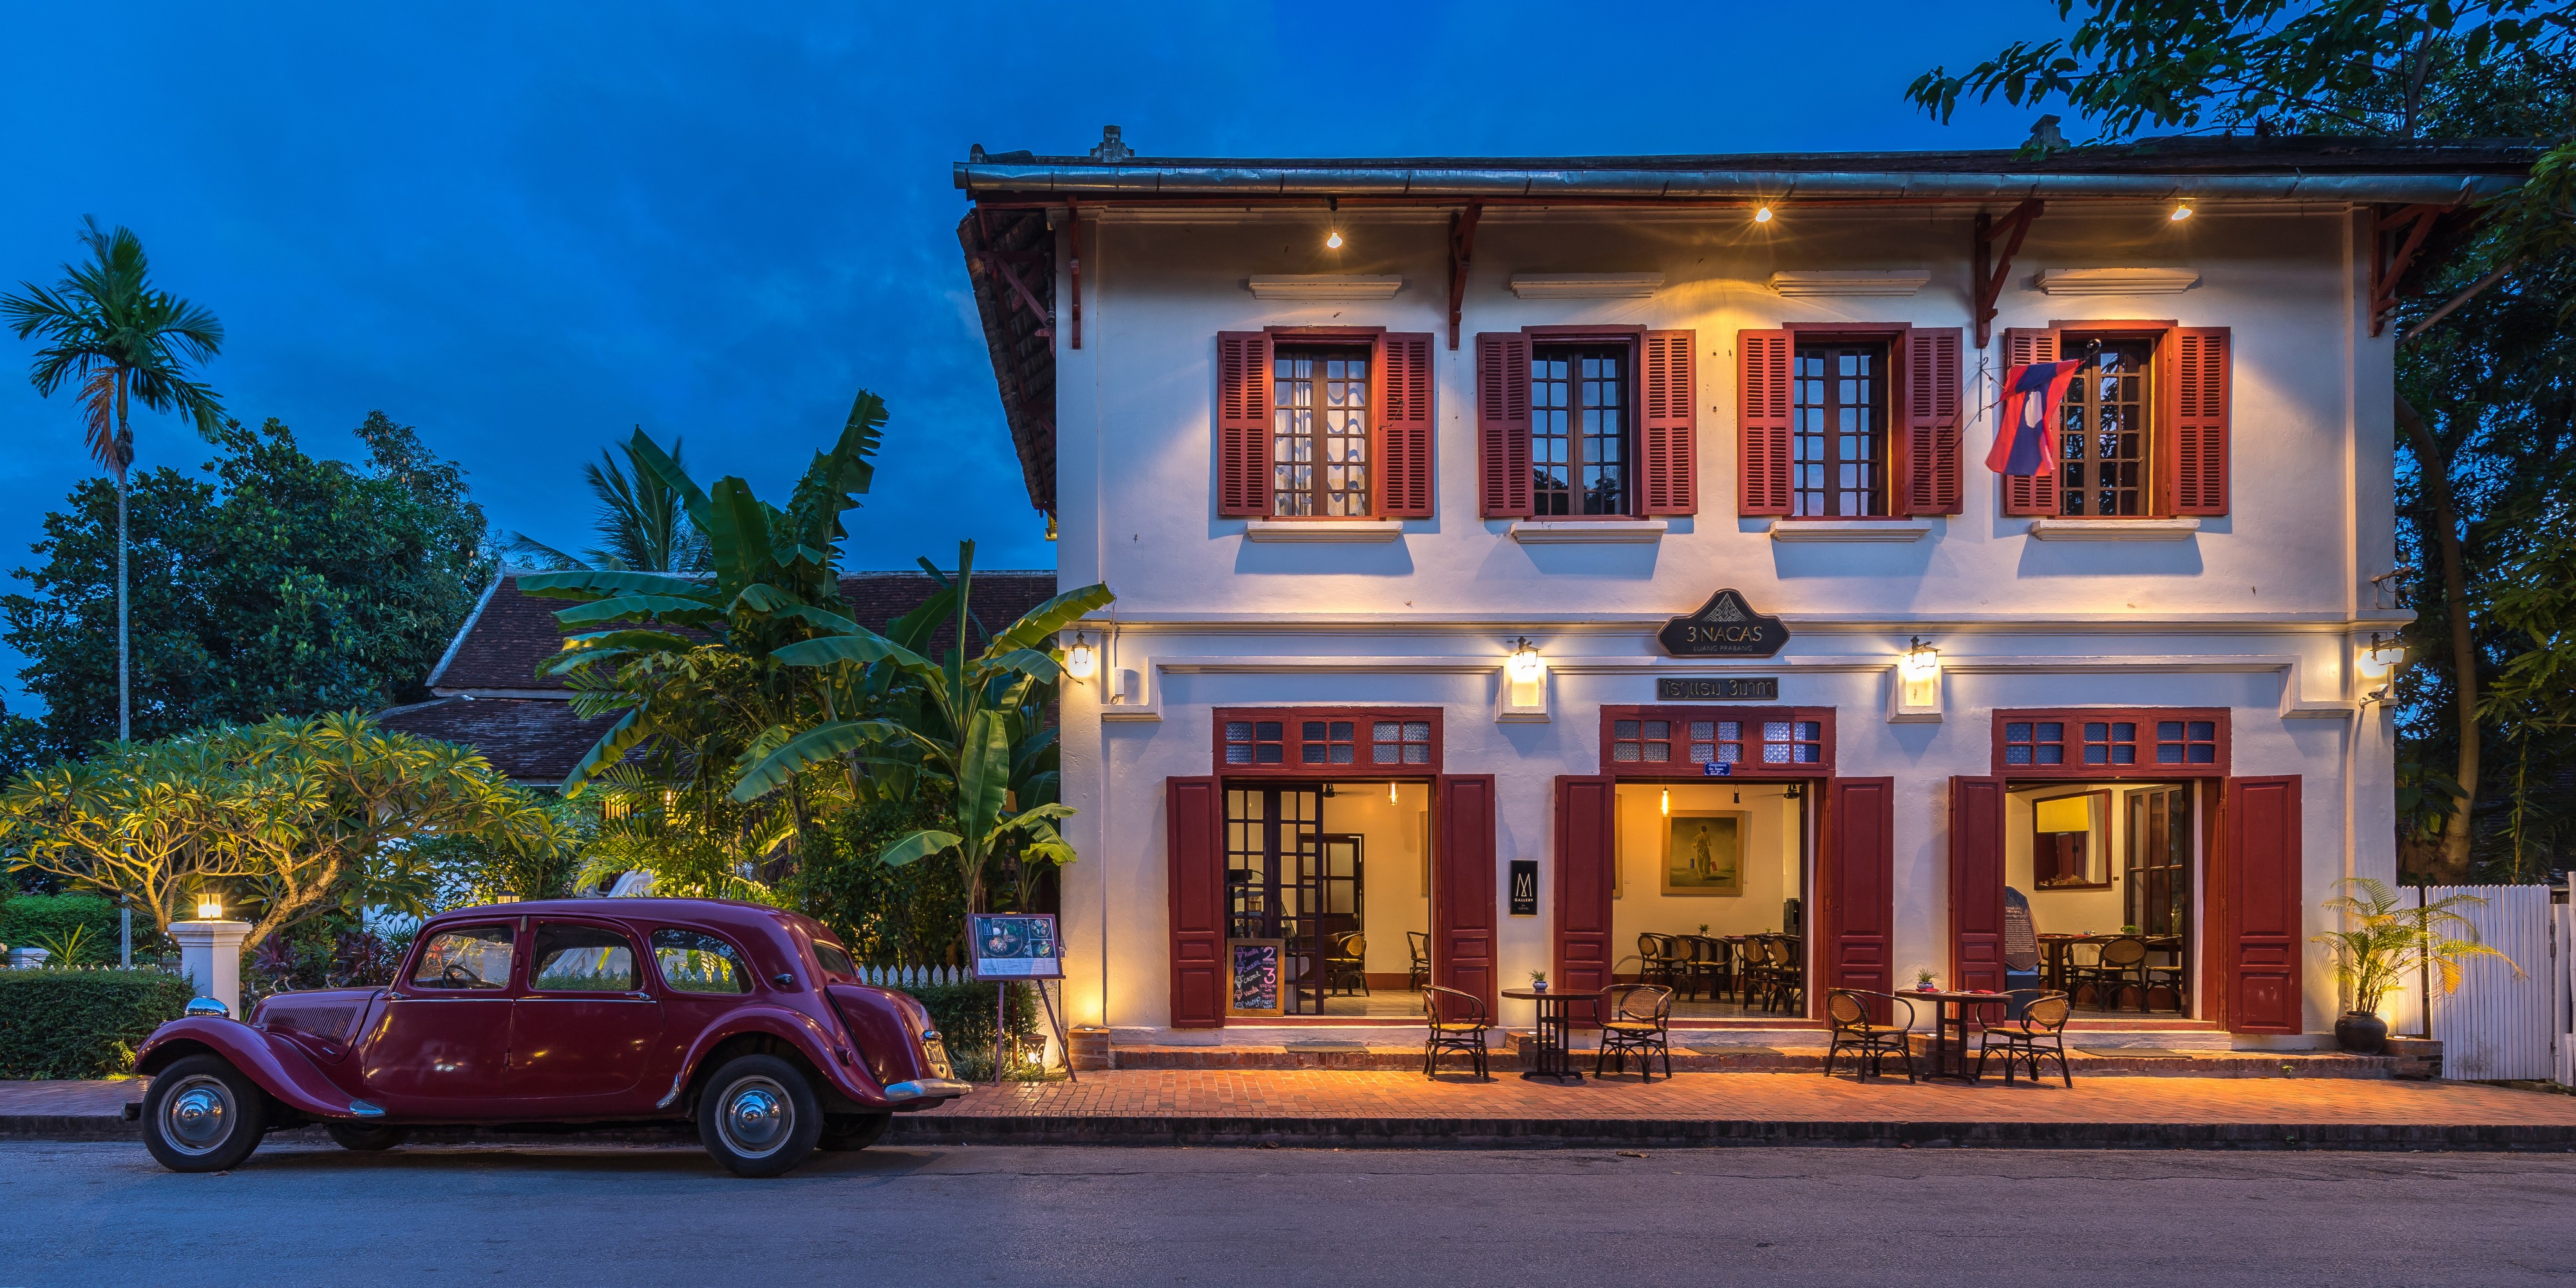 Hotel 3 Nagas with old red Citroen at blue hour in Luang Prabang